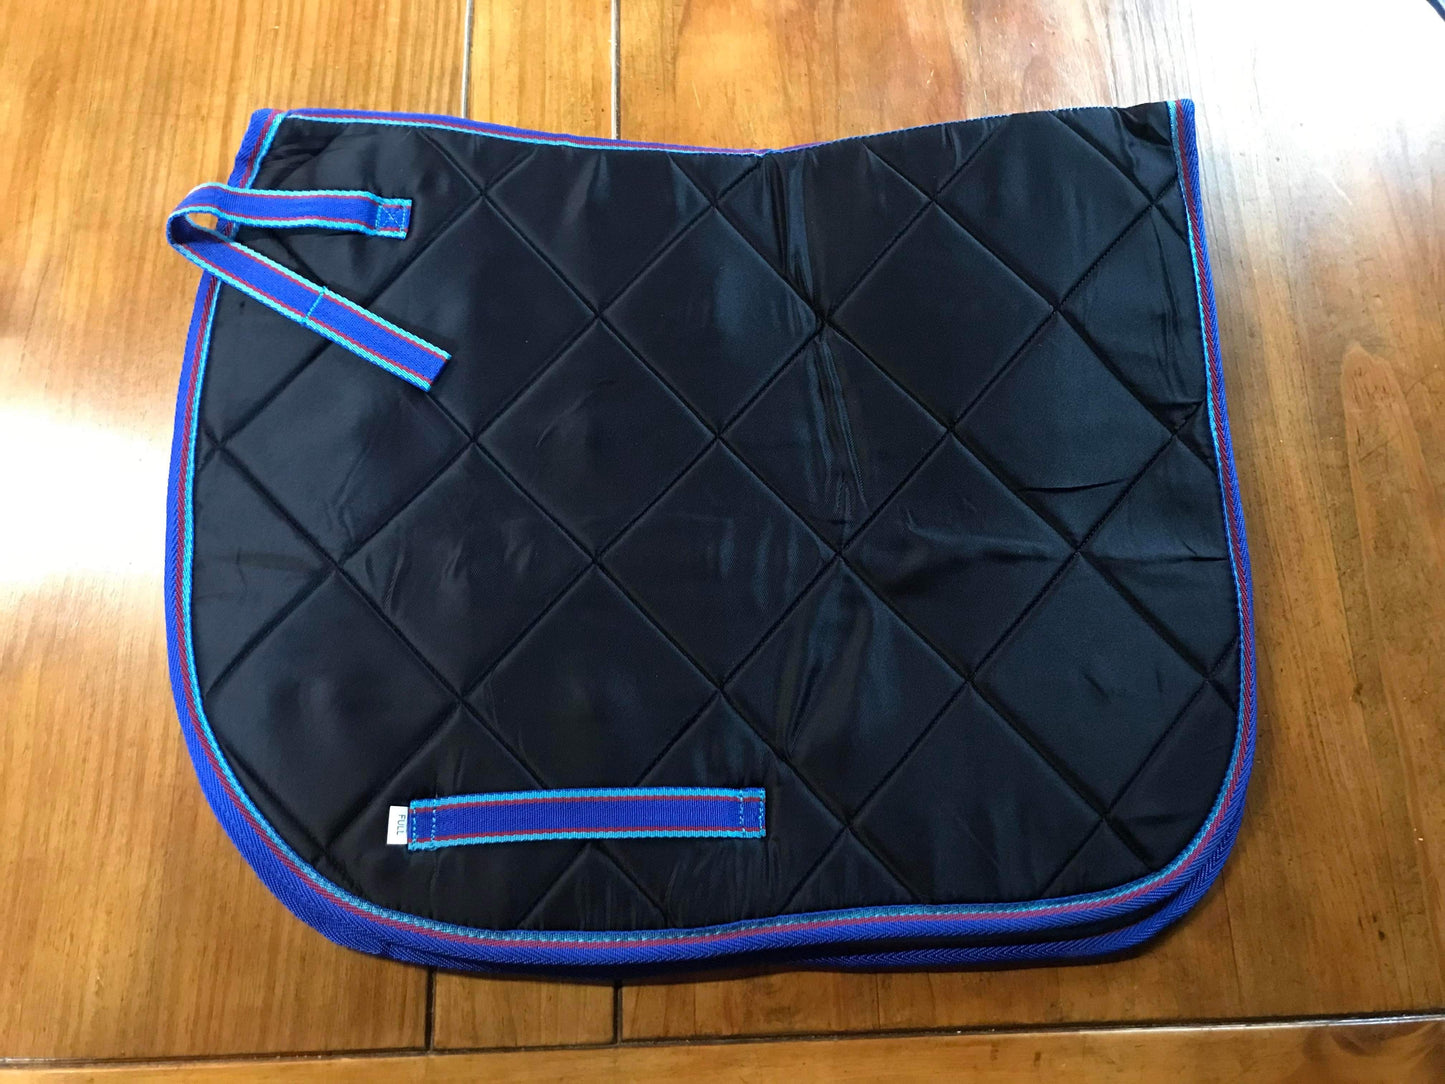 New DEAL OF THE DAY black and blue saddle pad FREE POSTAGE❤️